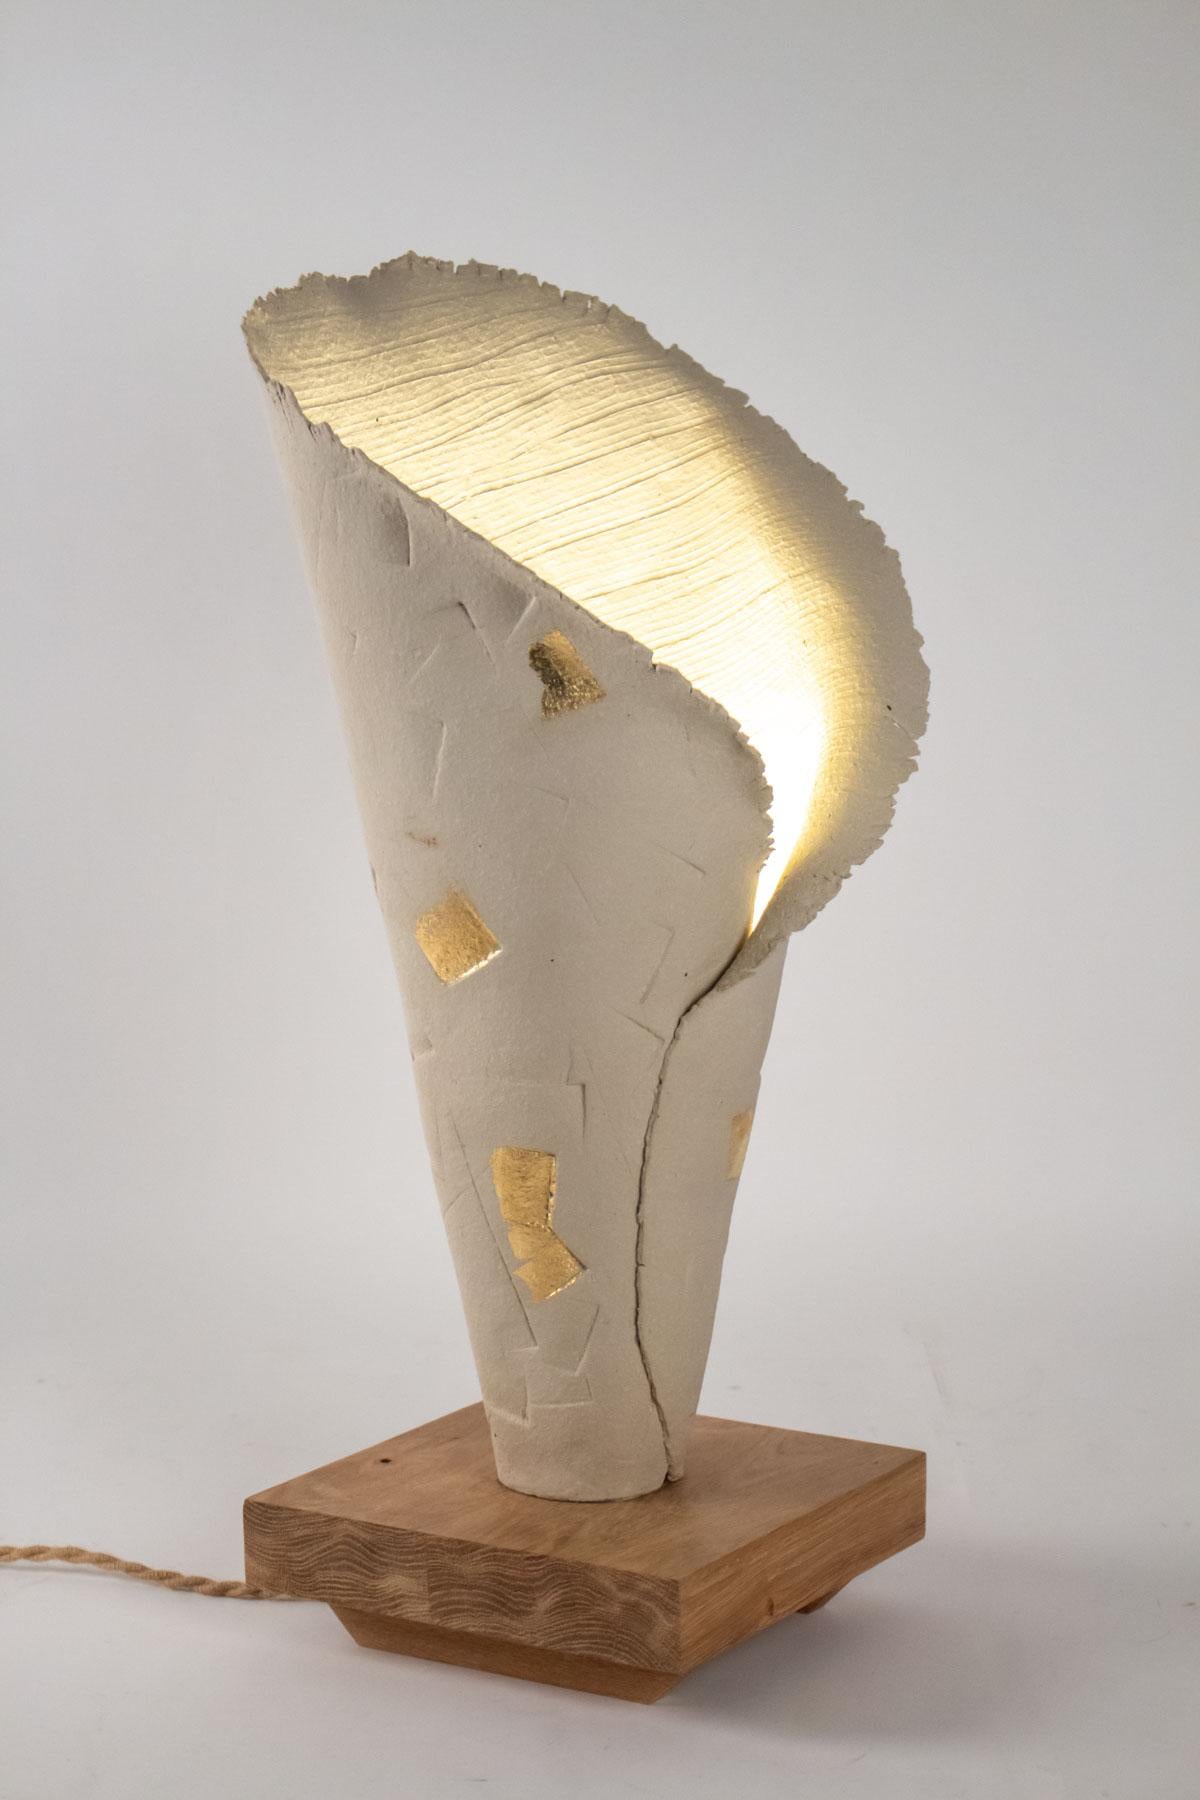 Modern Important Table Lamp Terracotta and Wood Base, Application of Gold Foil